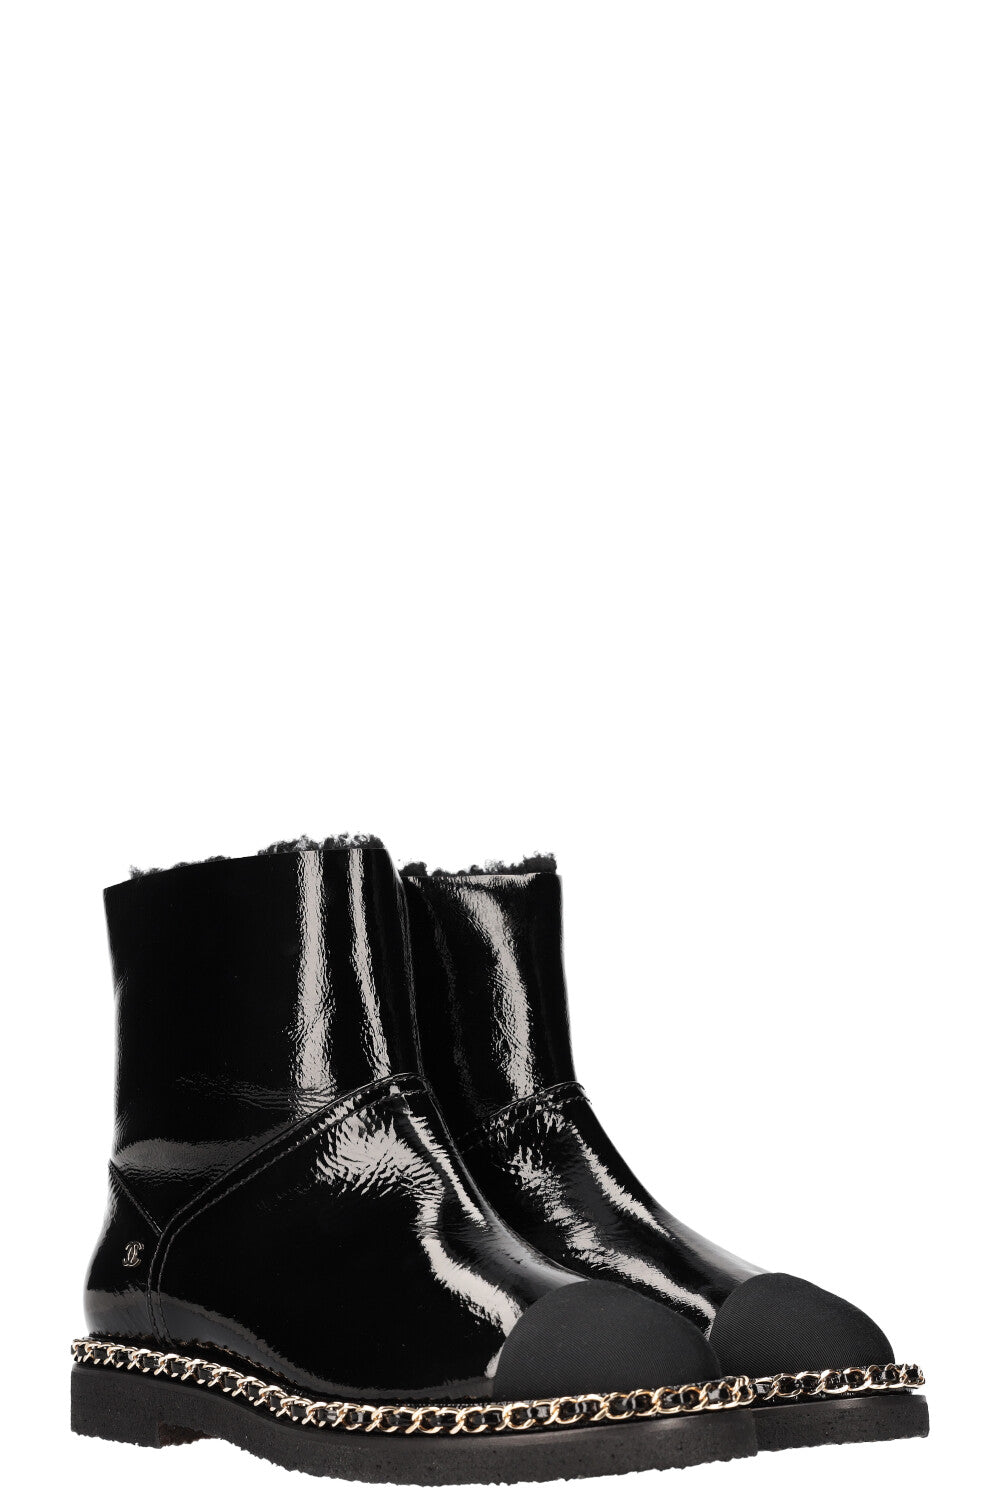 CHANEL Shearling Chain Boots Patent Black – REAWAKE